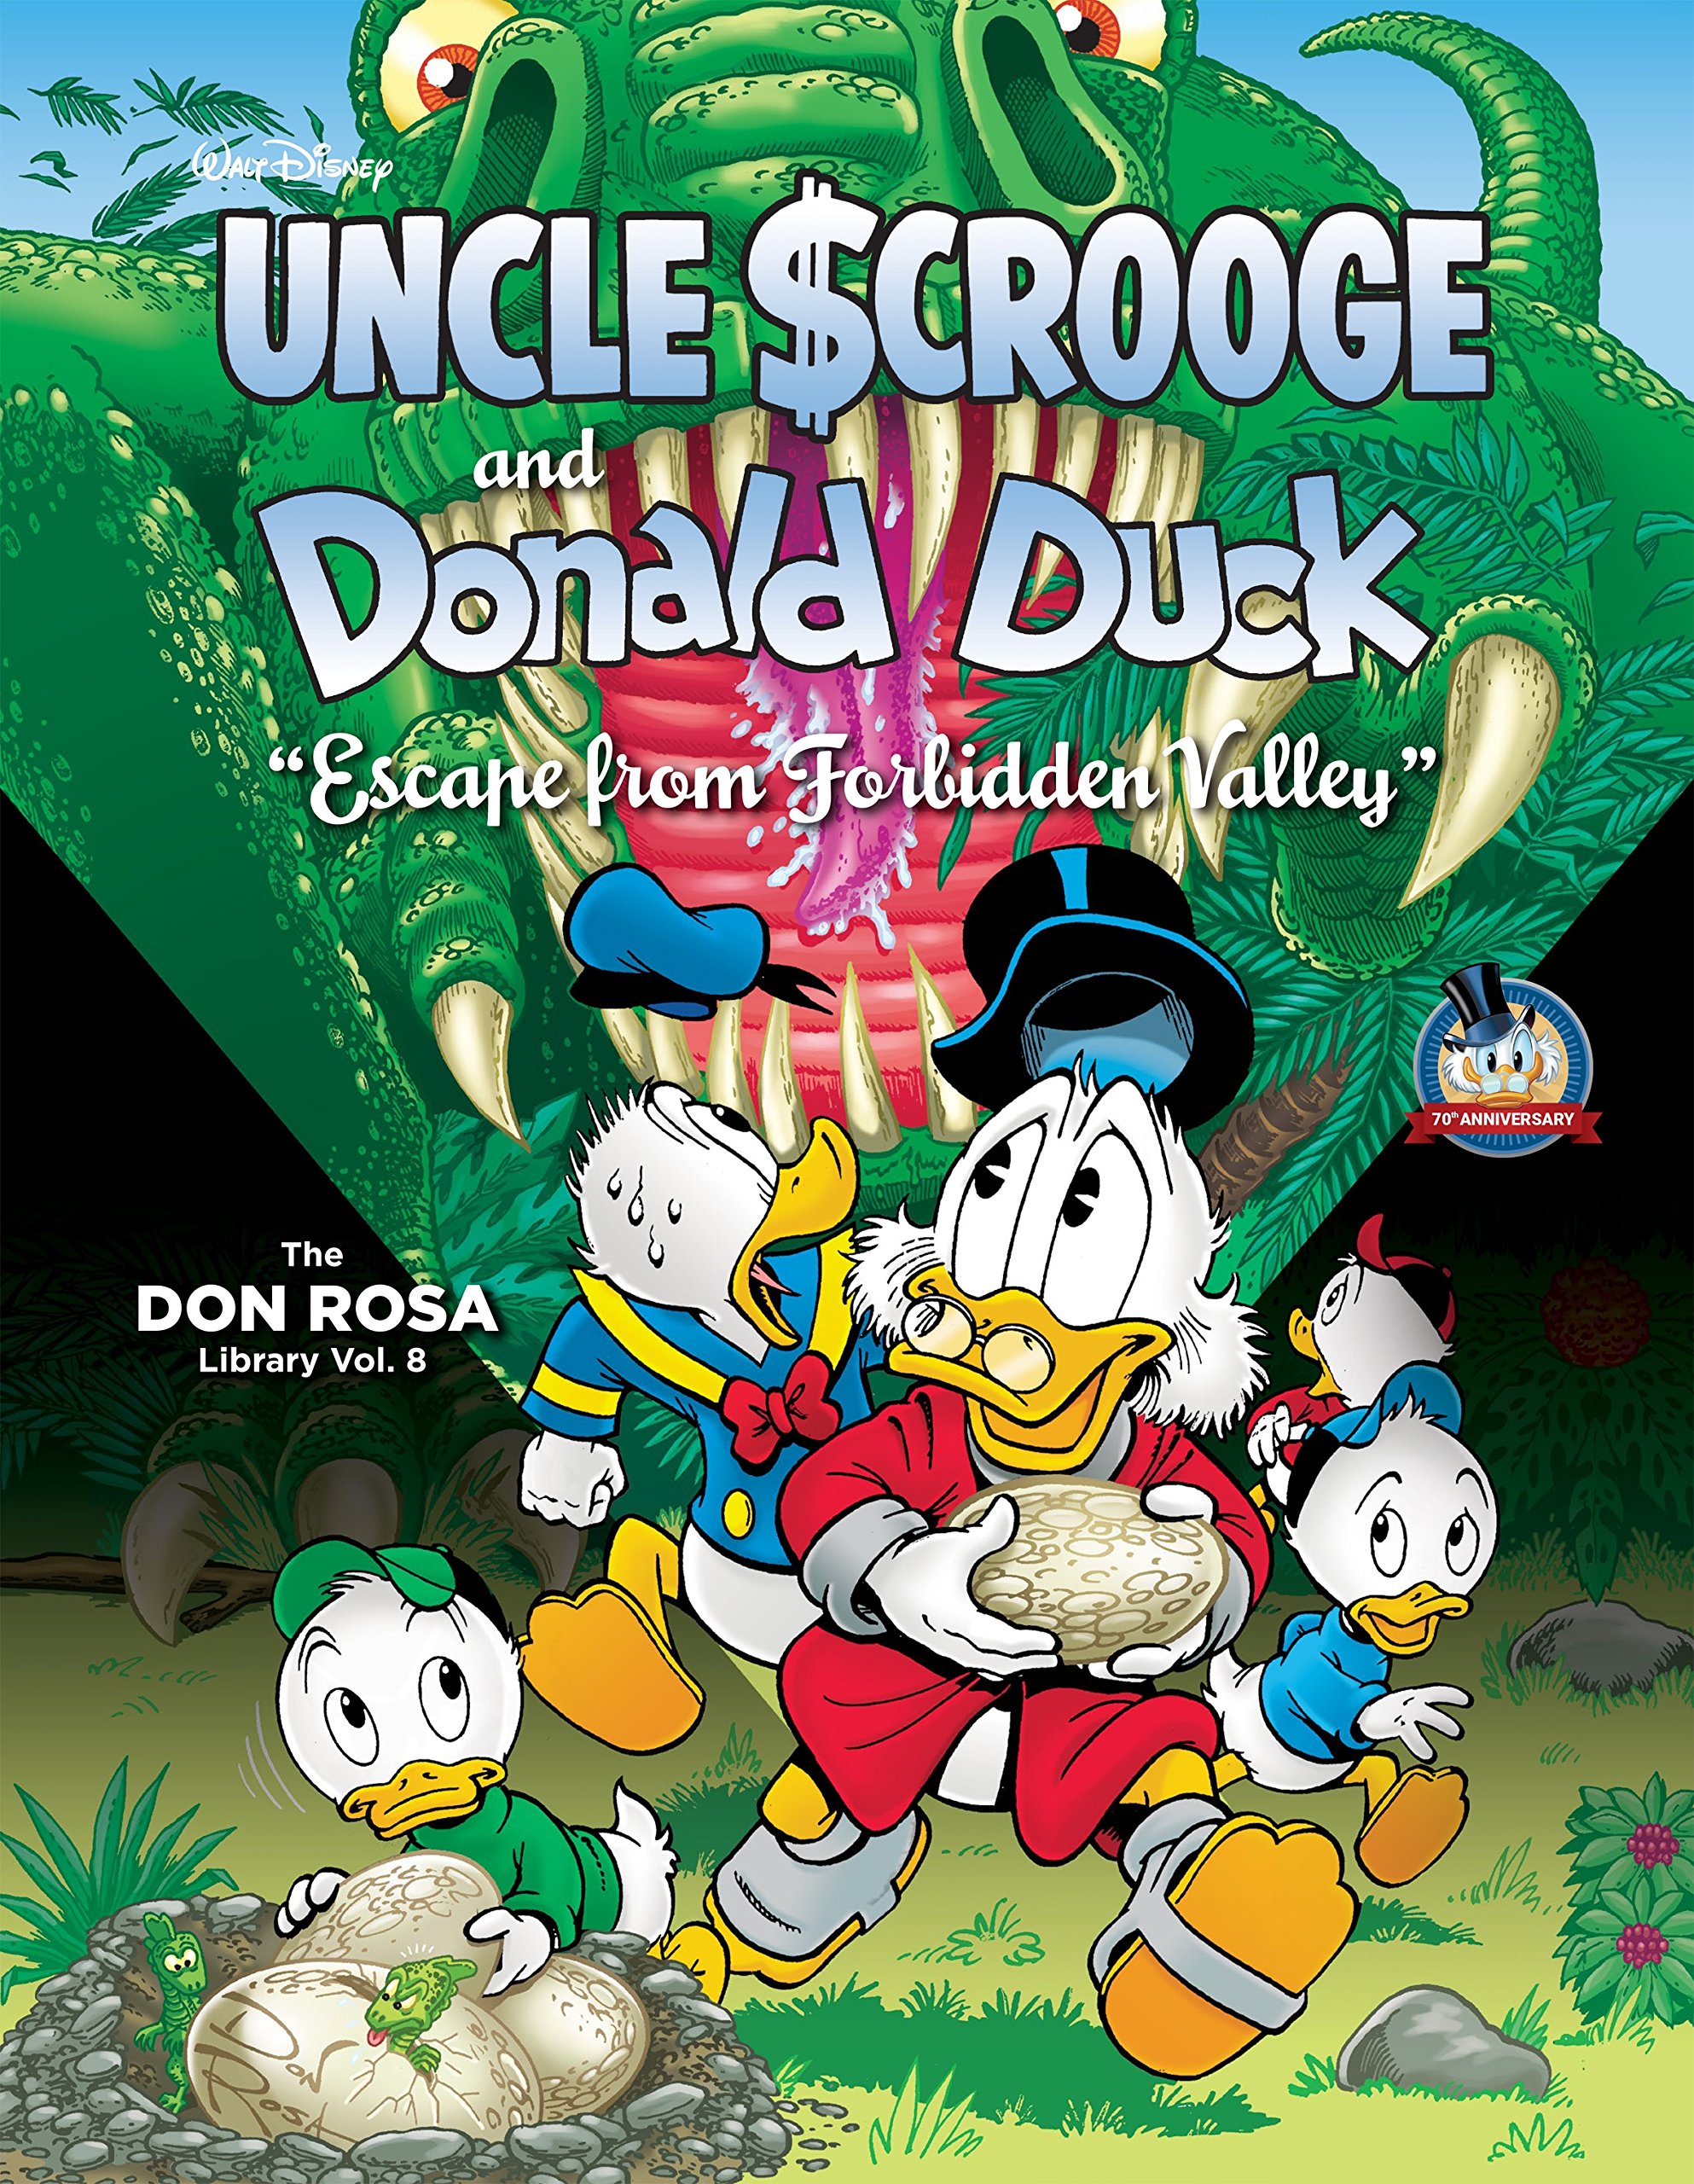 Walt Disney Uncle Scrooge and Donald Duck Vol. 8: Escape from Forbidden Valley: The Don Rosa Library Vol. 8